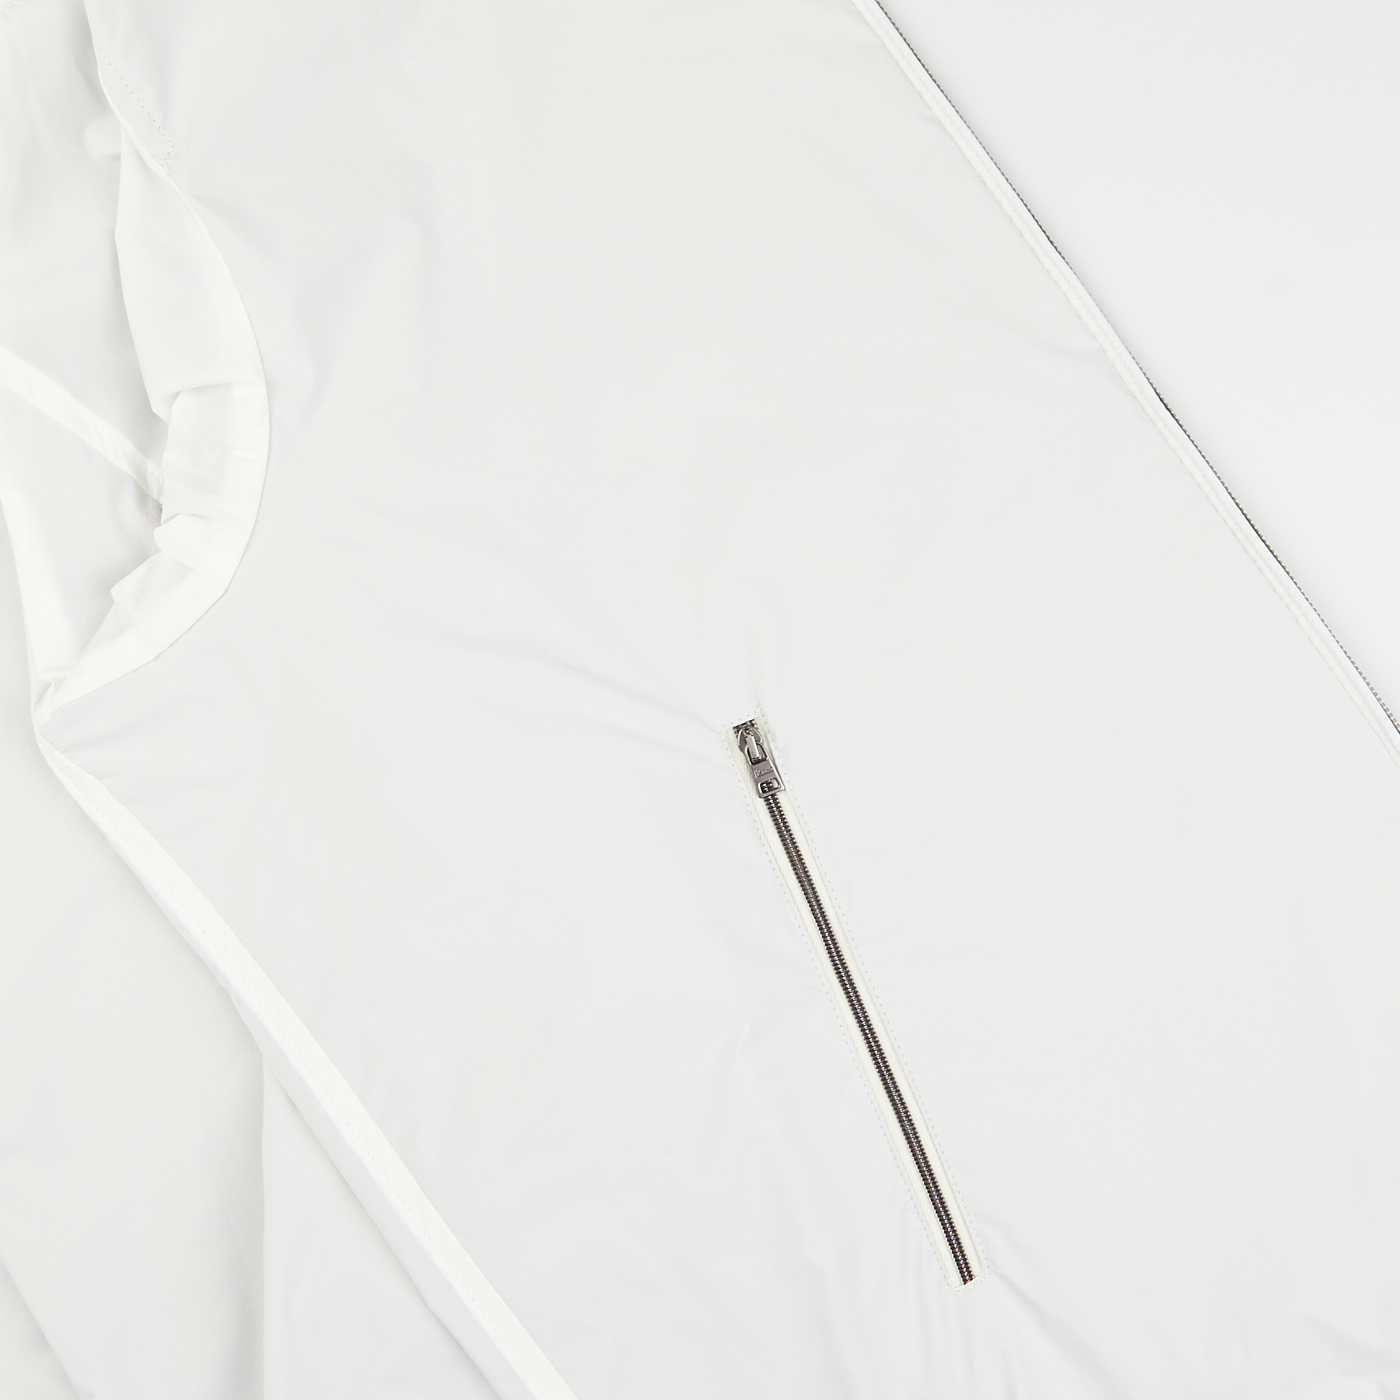 A metal zipper partially open on a water-resistant Herno Olive Green White Reversible Nylon Blouson fabric background.